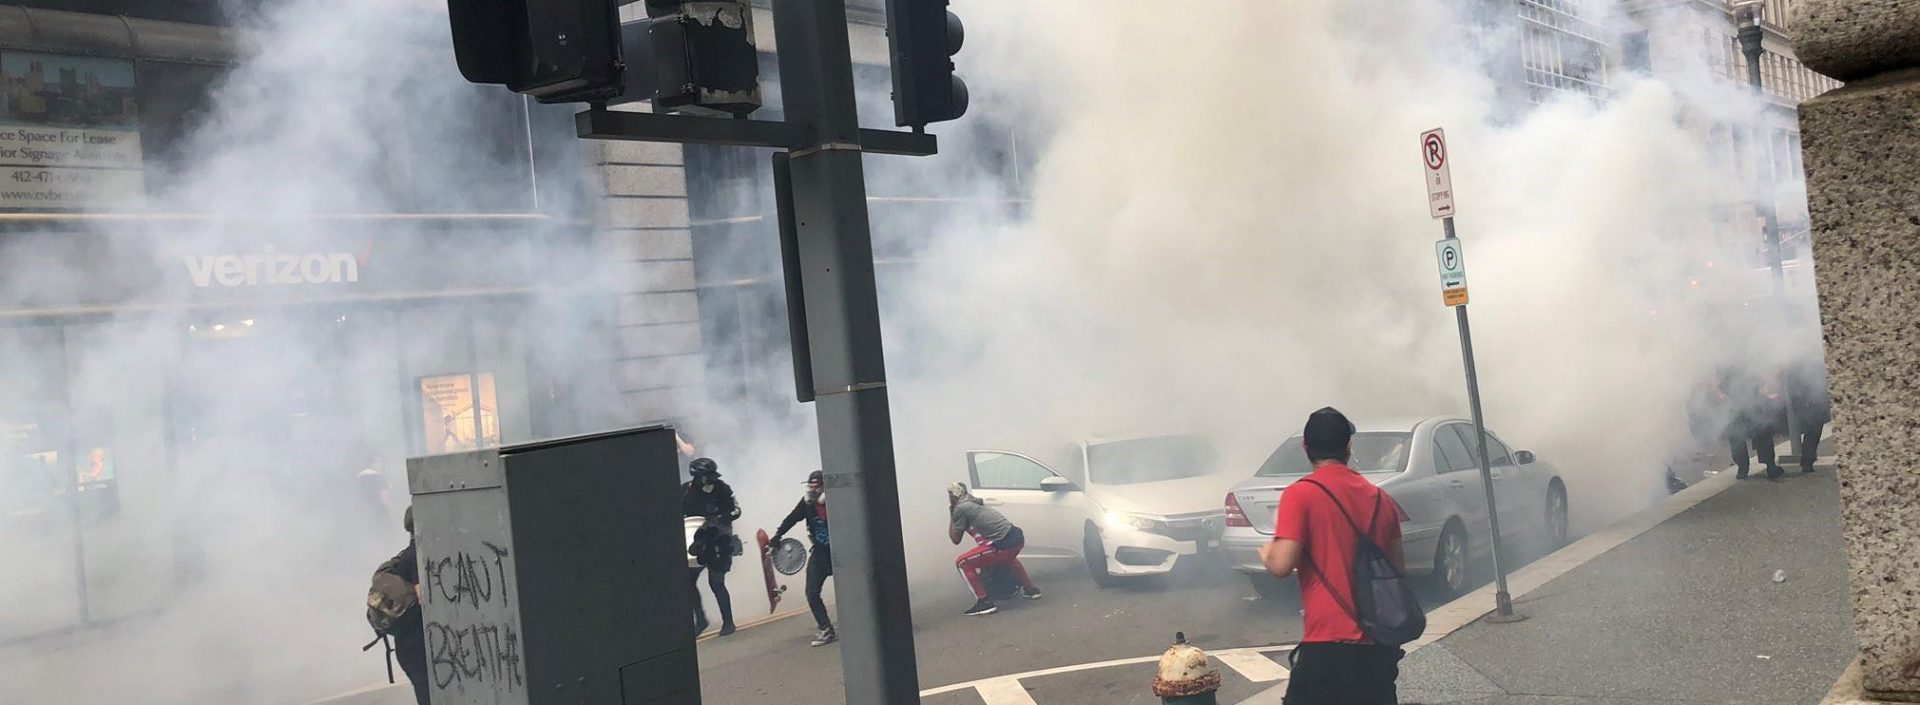 Pittsburgh police used chemical munitions to disperse protesters who had gathered downtown on Saturday, May 30. Two agencies are investigating how police responded.